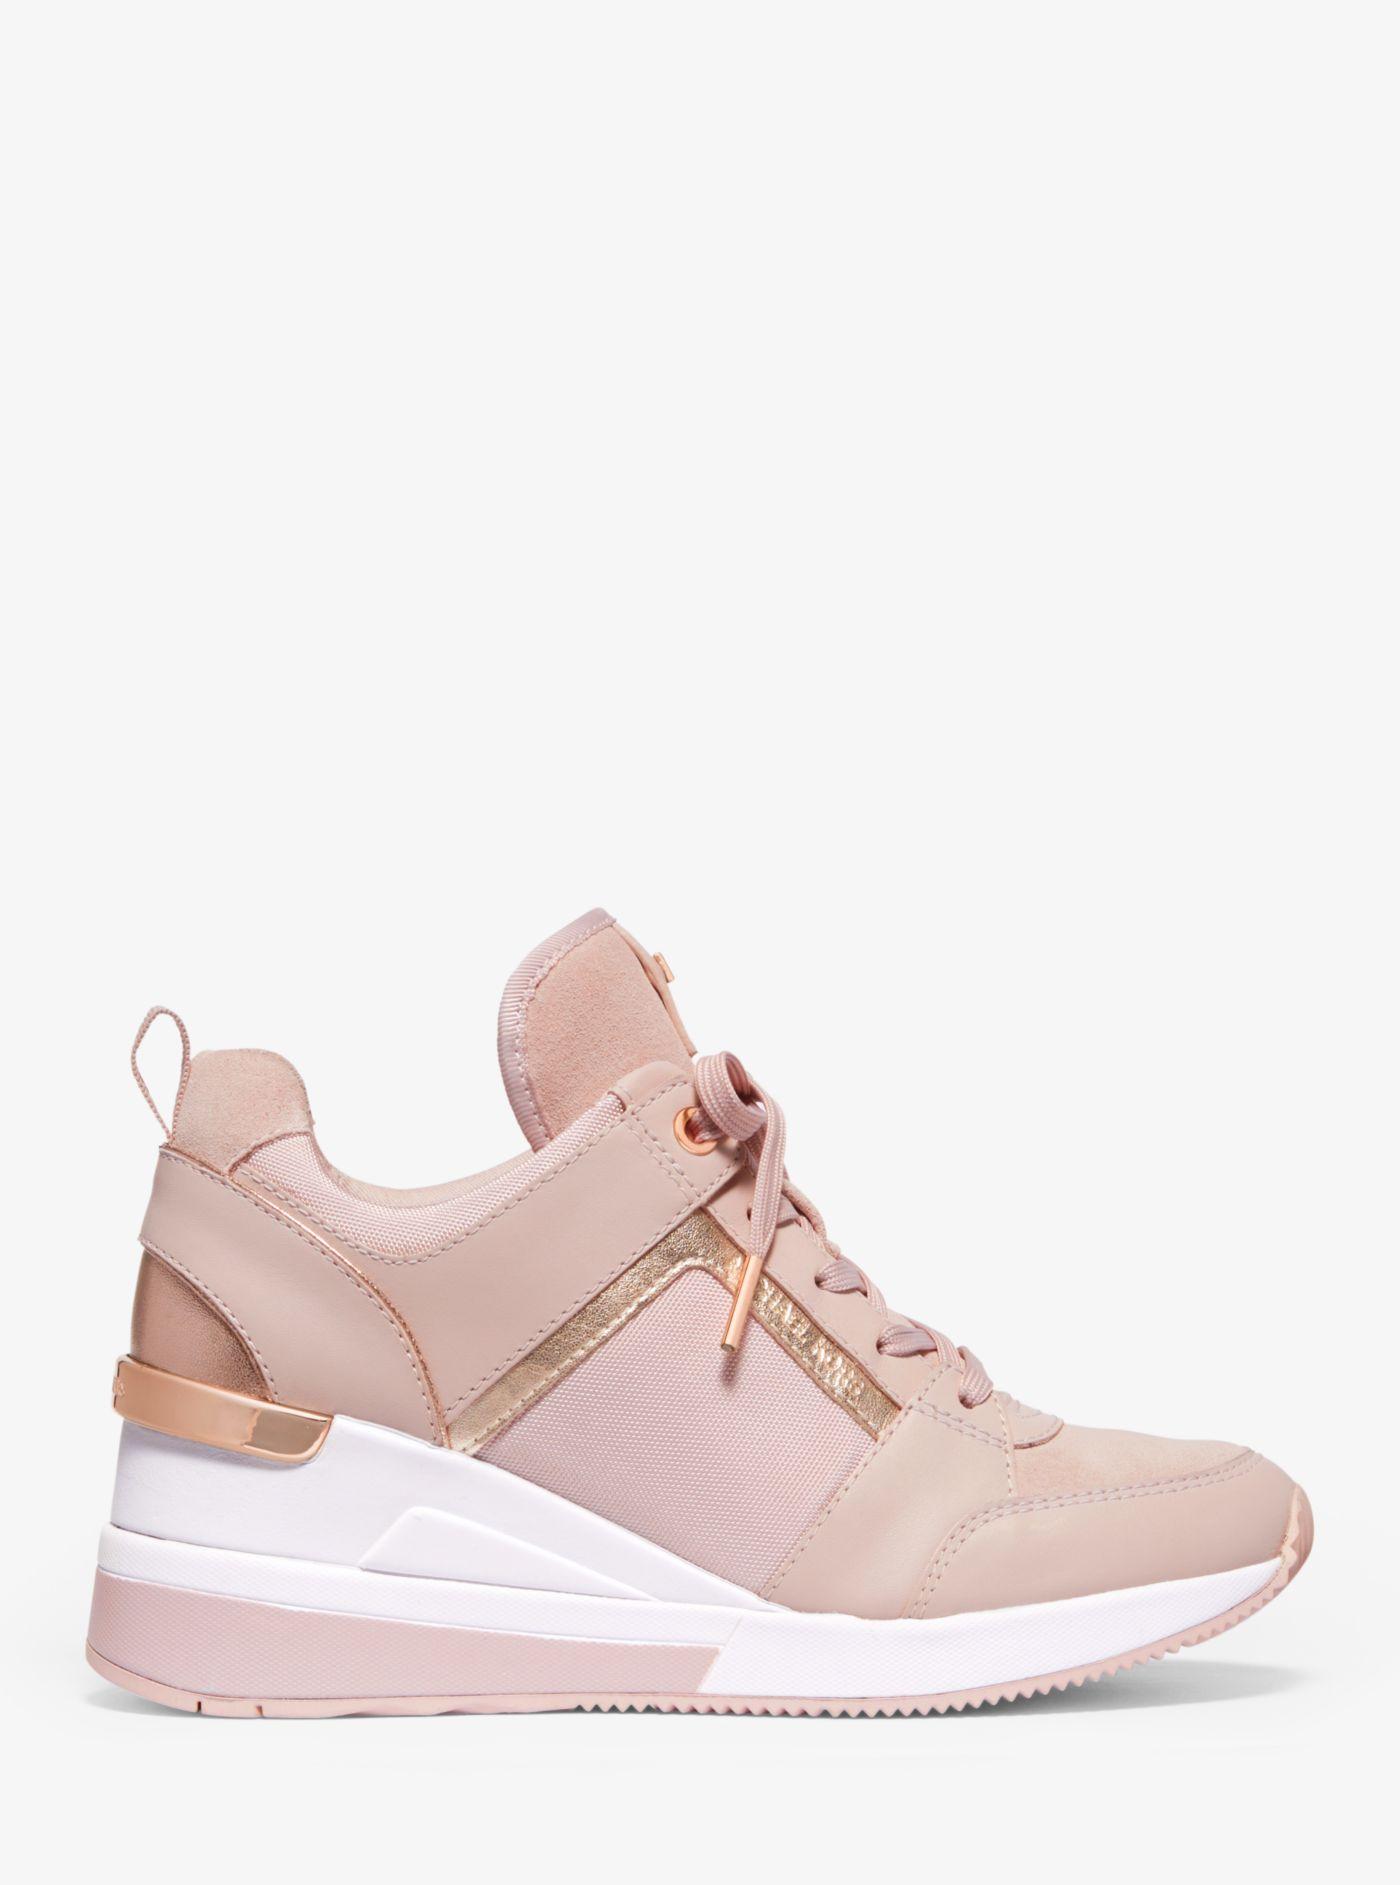 Michael Kors Georgie Leather And Canvas Trainer in Soft Pink (Pink) | Lyst